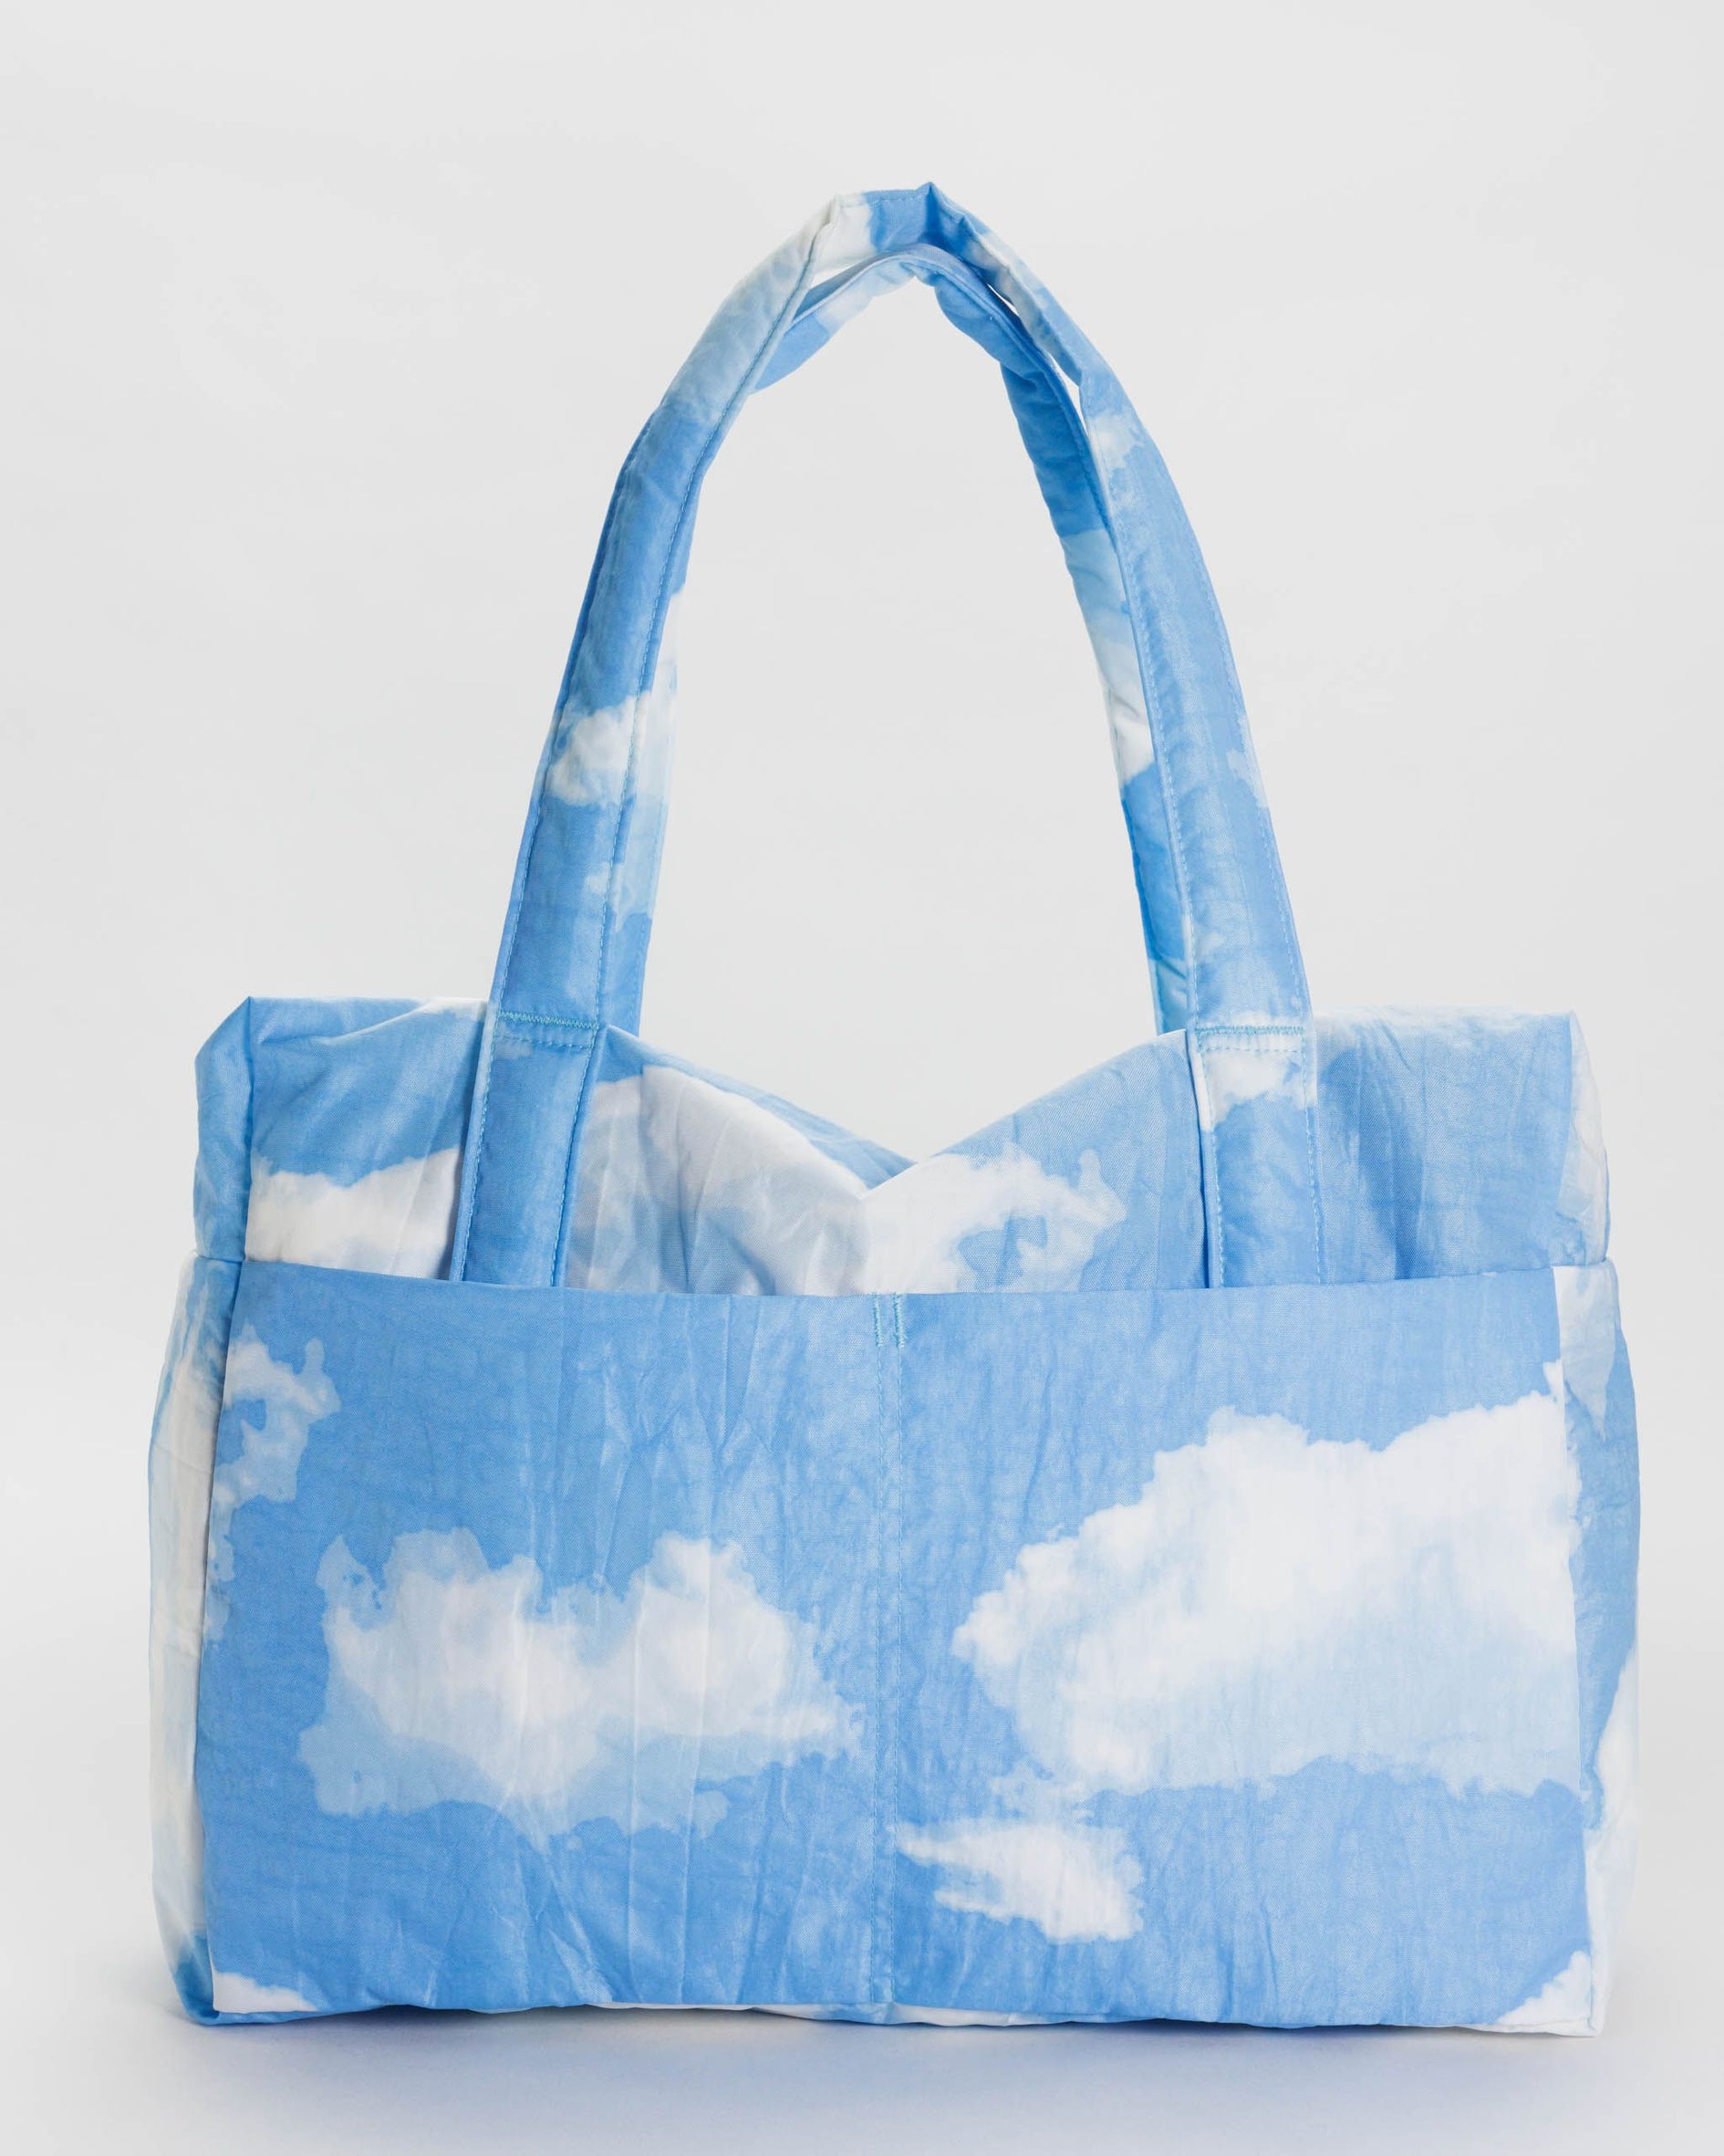 Cloud Carry-on